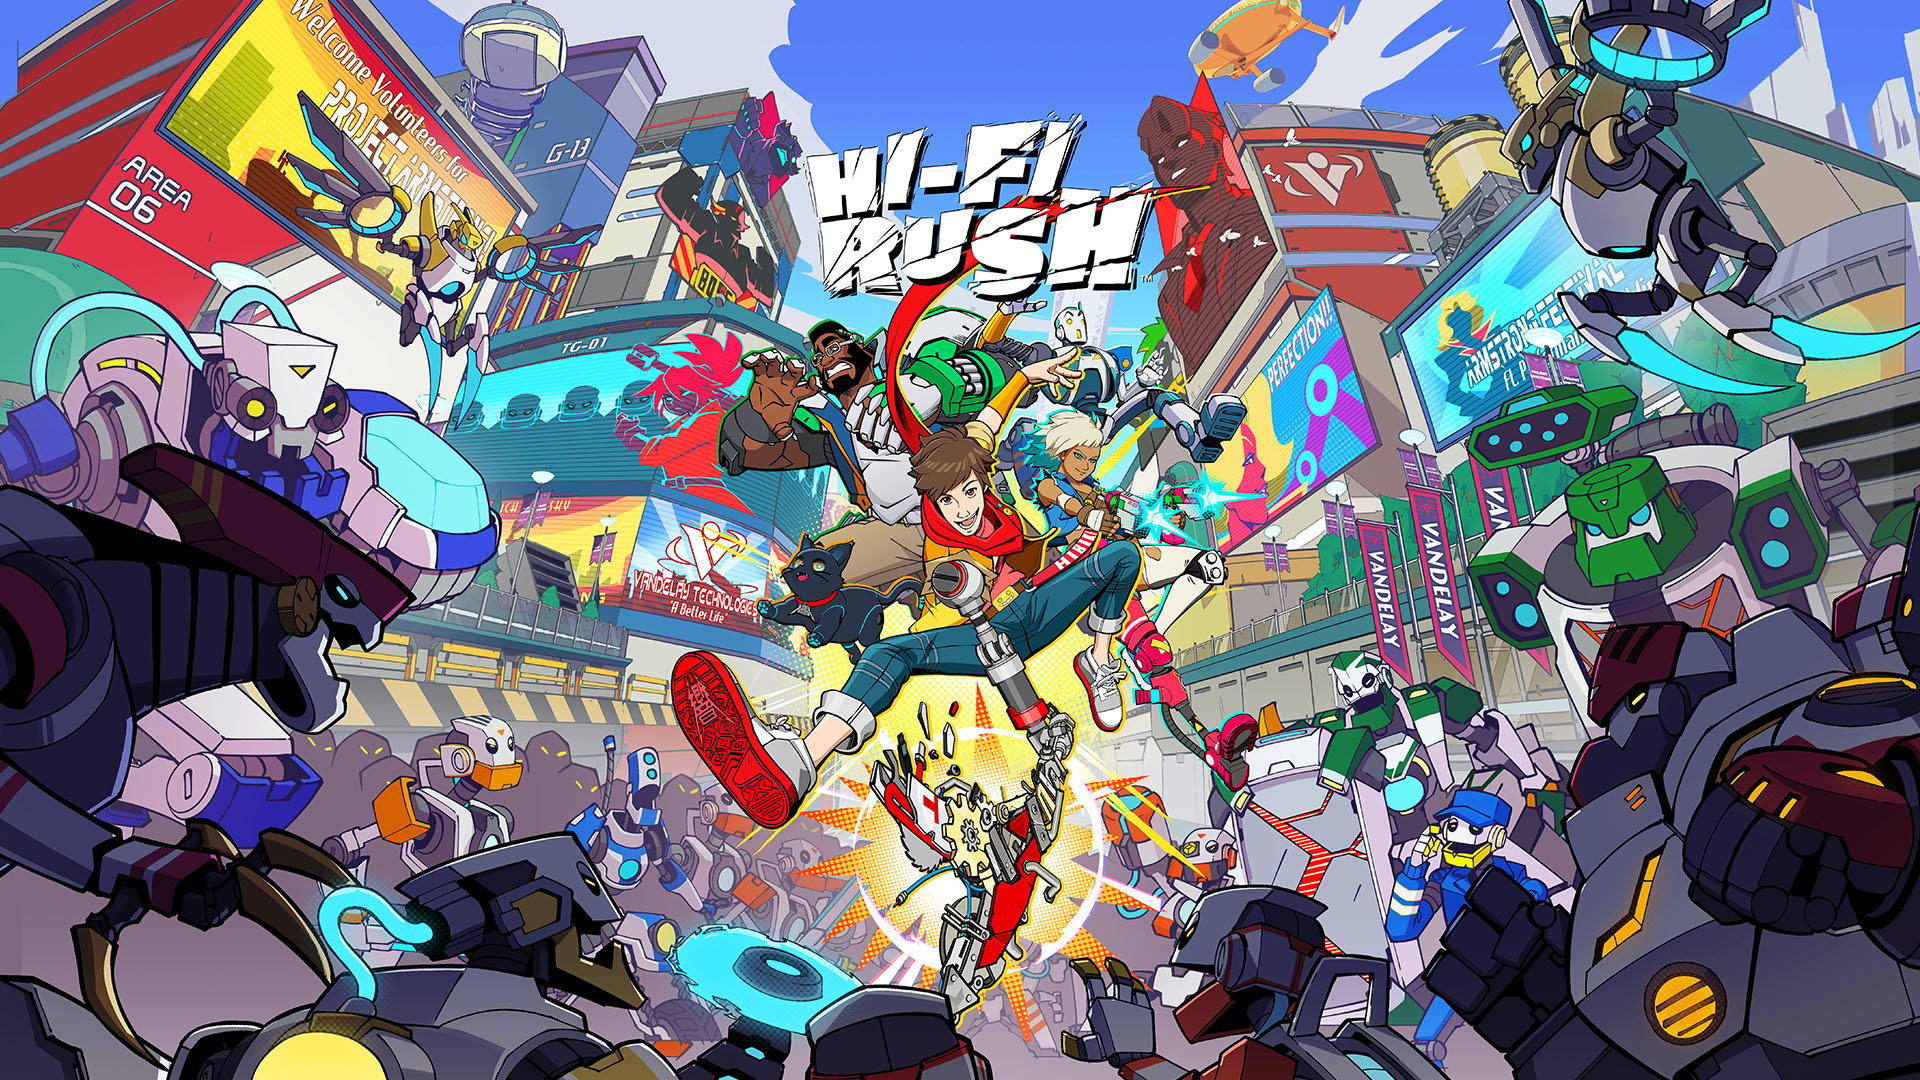 Bethesda Softworks and Tango Gameworks announce rhythm action game Hi-Fi RUSH for Xbox Series, PC; now available - Gematsu